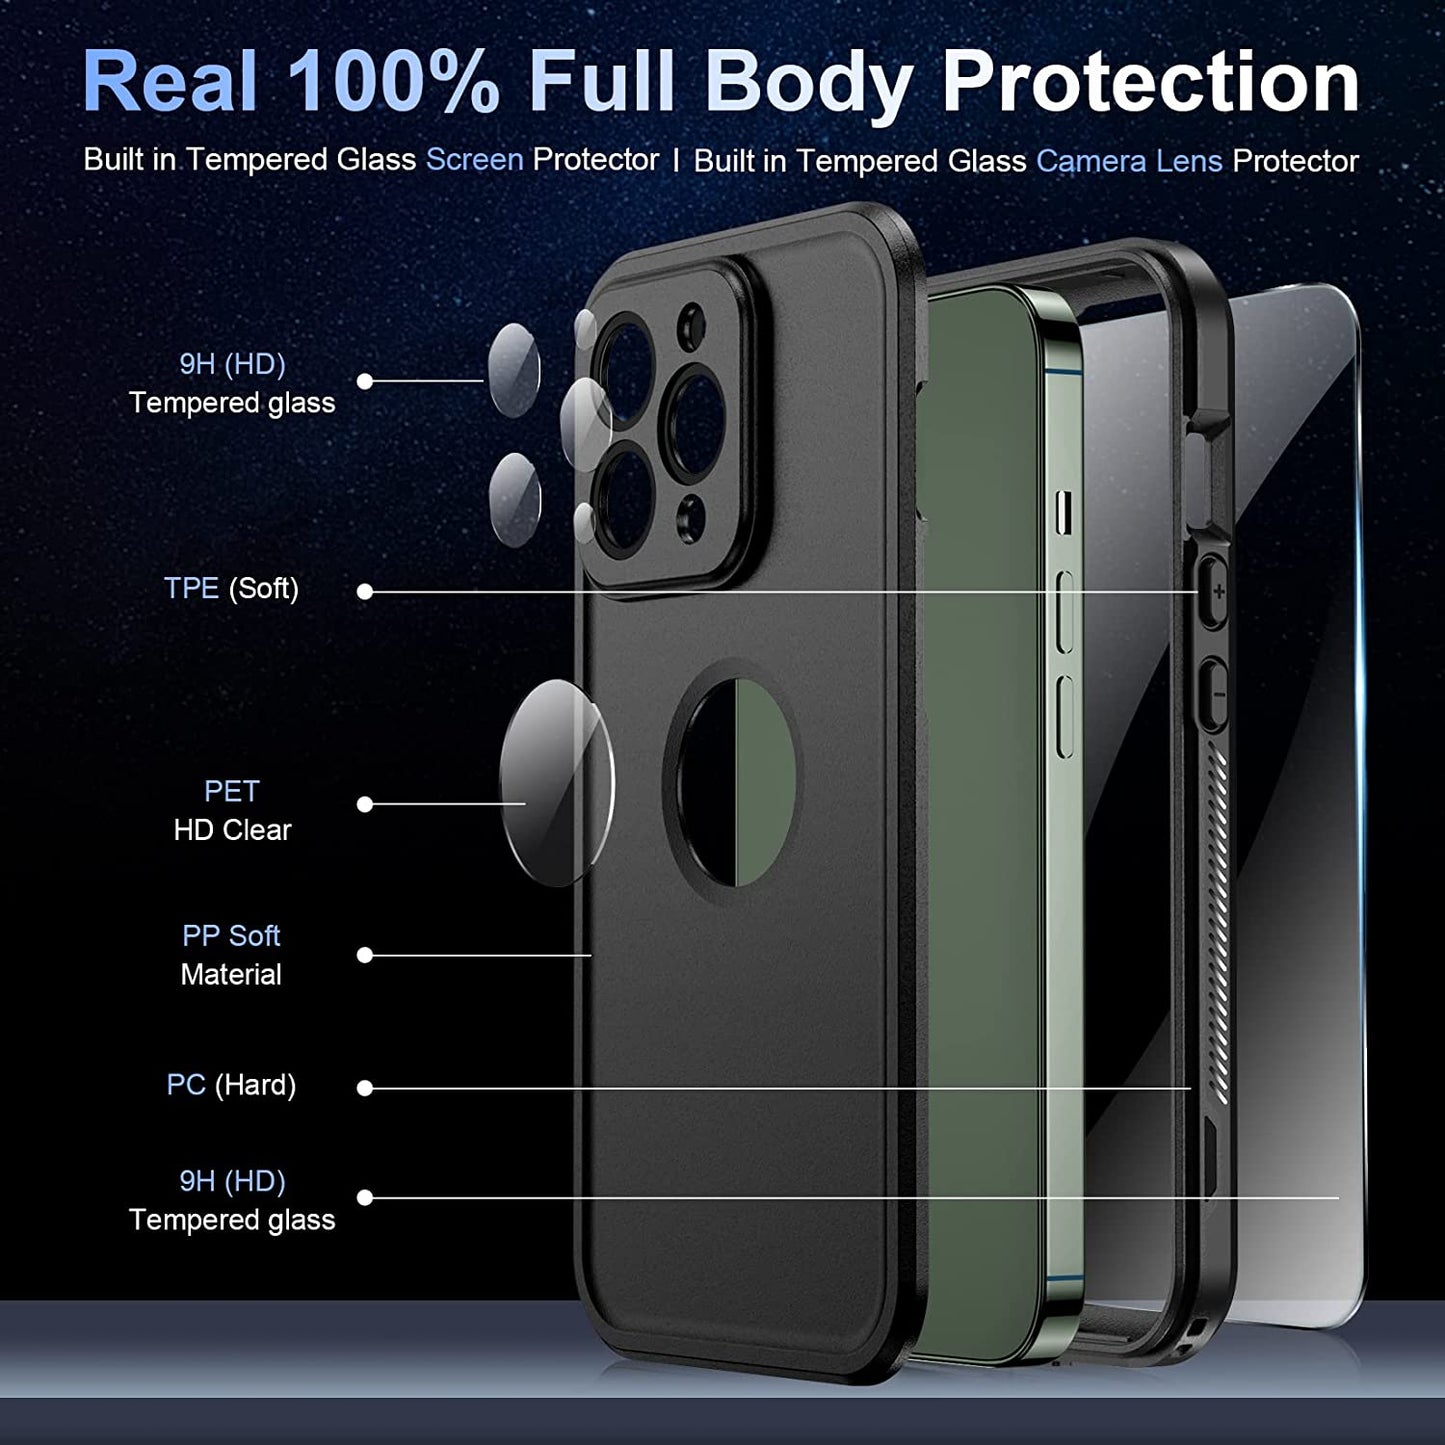 Oaktree iPhone 13 Pro Max Shockproof Waterproof Full-Body Case with Built-in 9H Tempered Glass Screen - Black